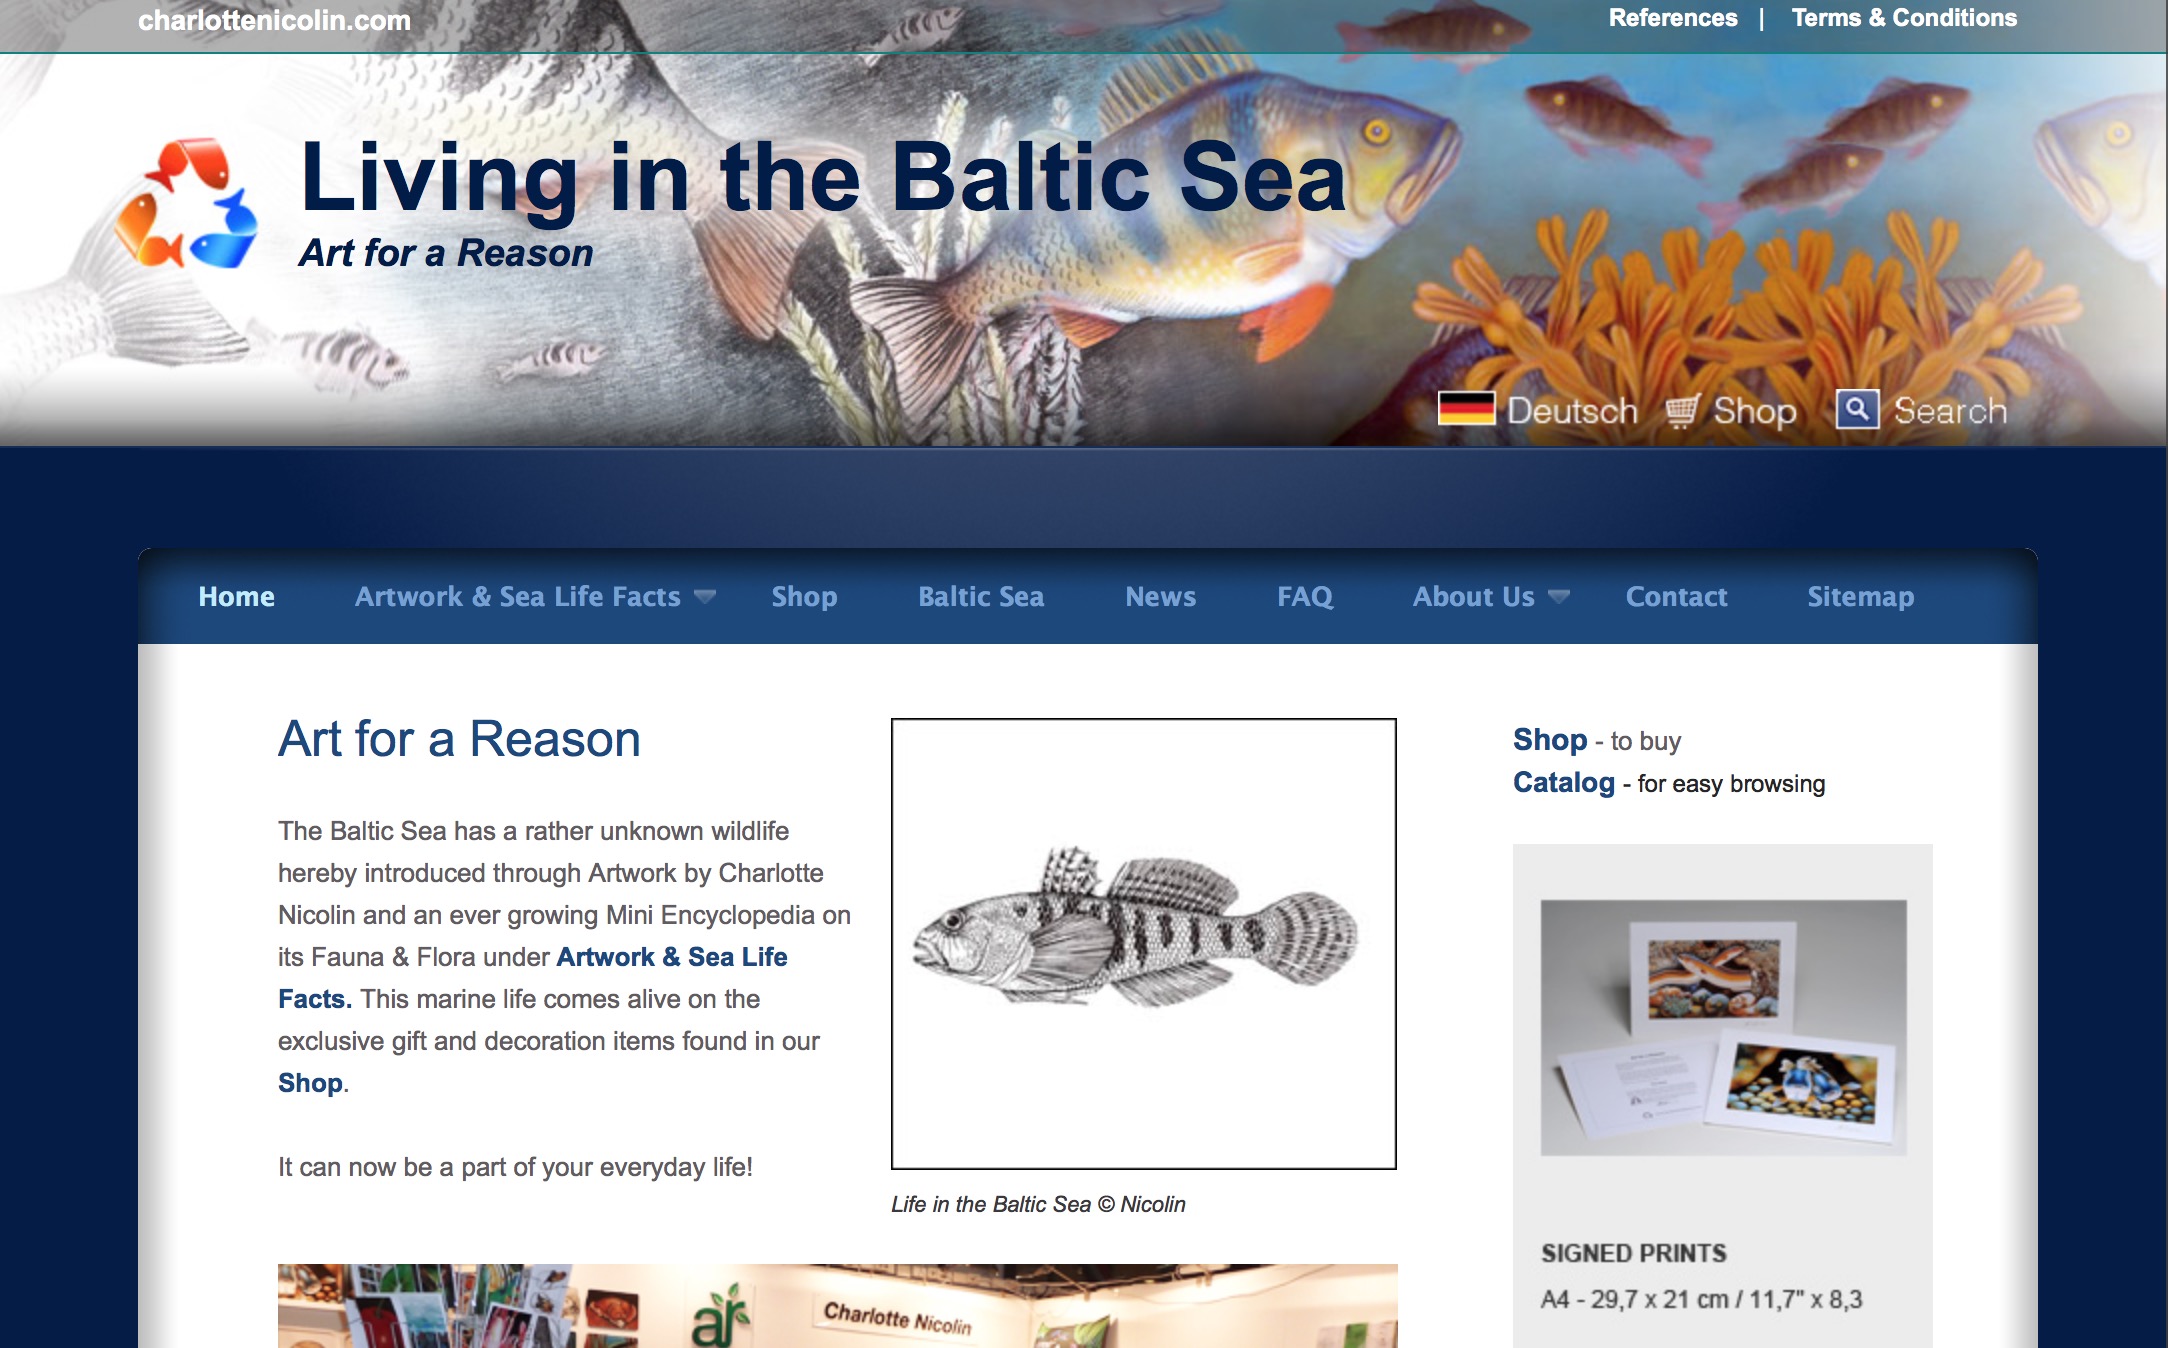 Living in the Baltic Sea